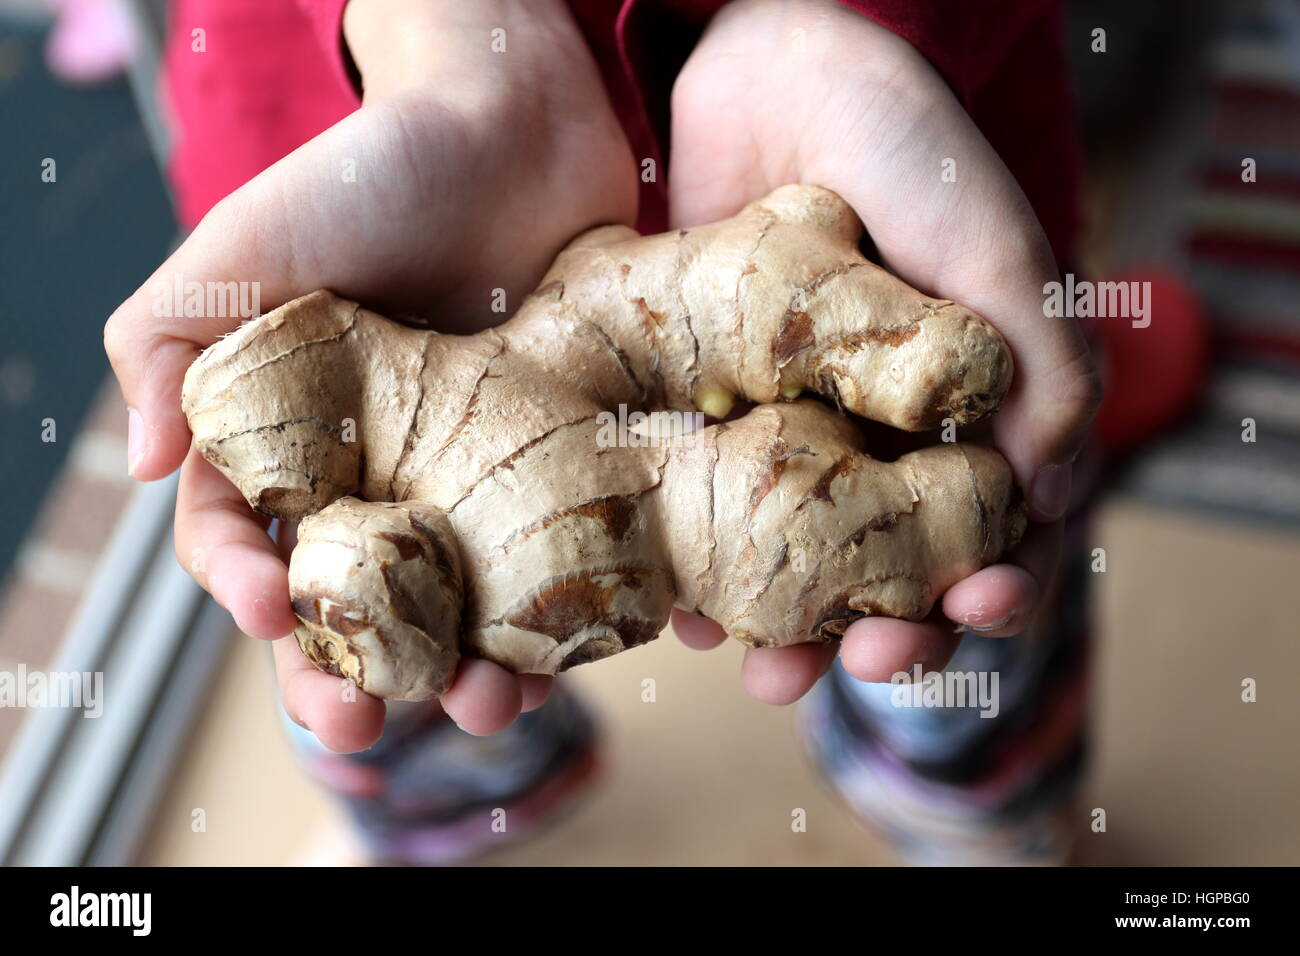 Close up hand holding Ginger or known as Zingiber officinale in hand Stock Photo